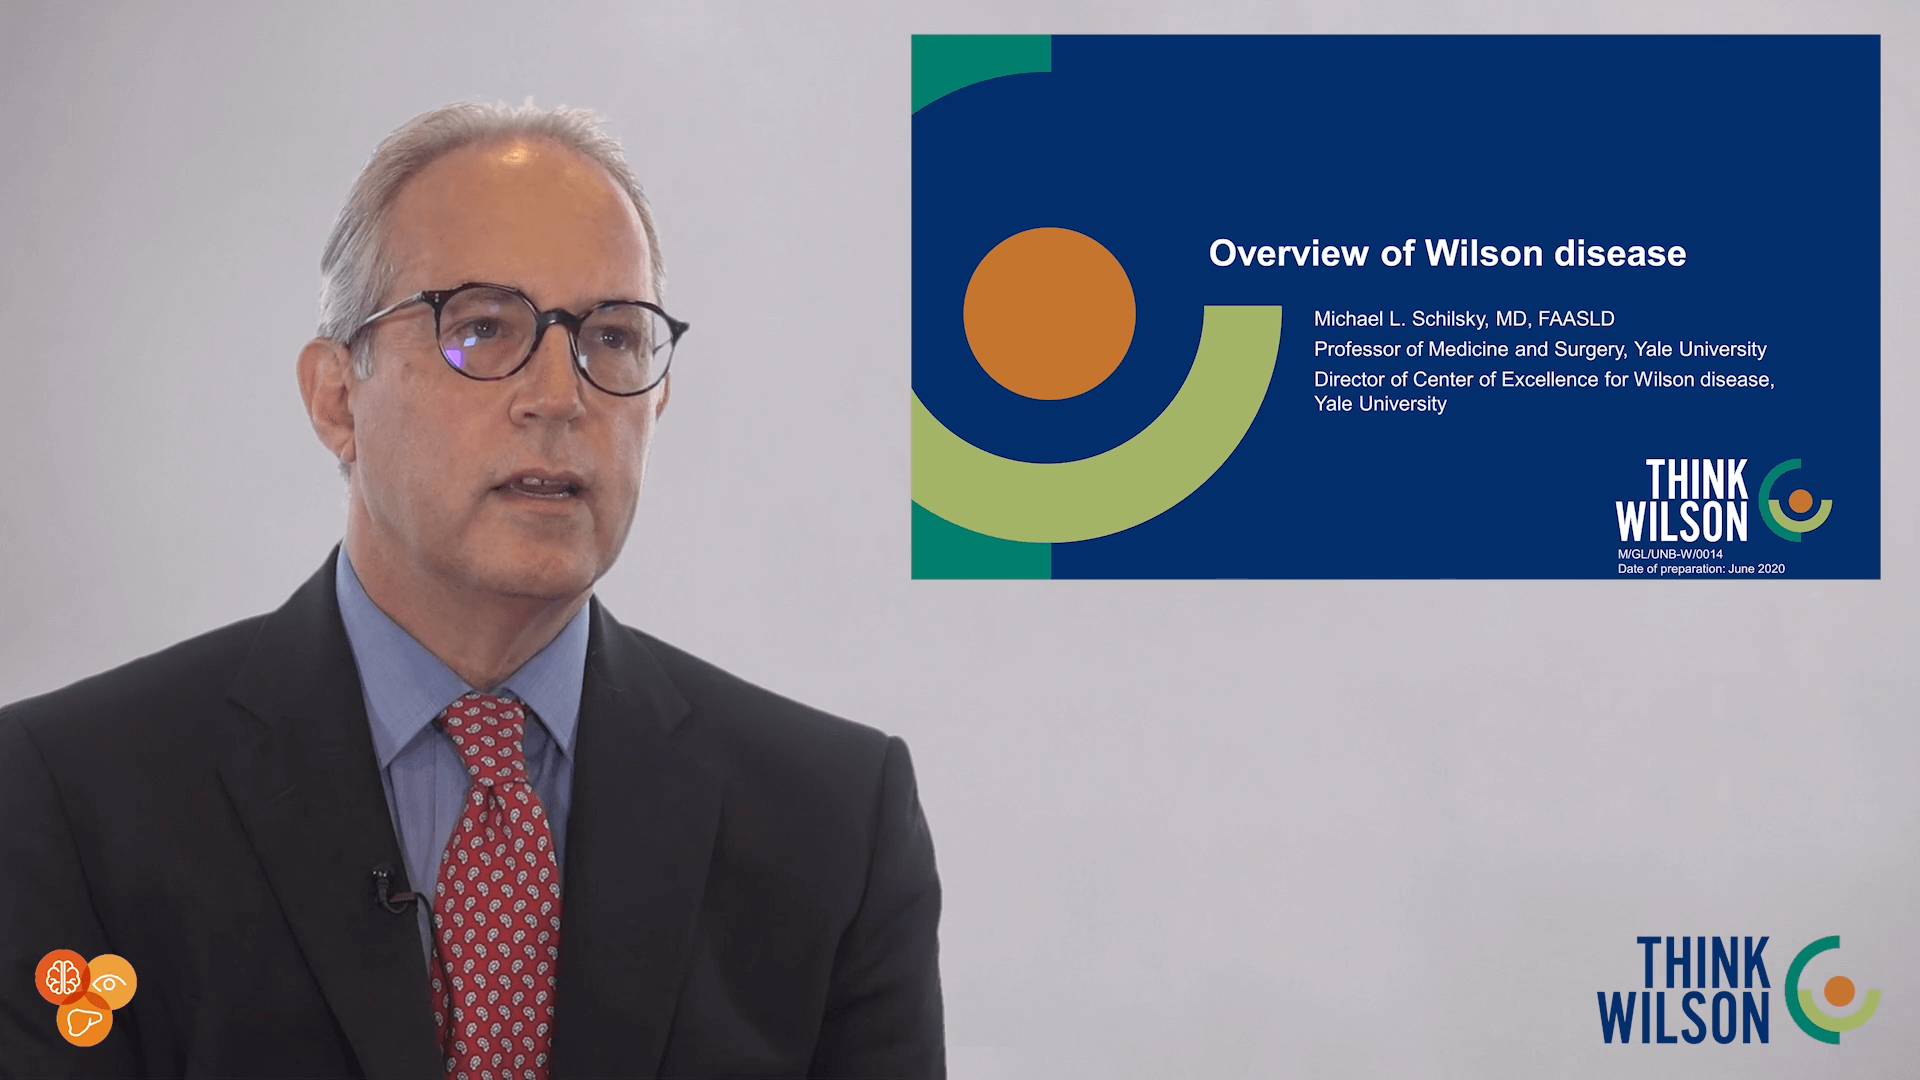 Michael L. Schilsky, MD, FAASLD. Professor of Medicine and Surgery, Yale University. Director of Center of Excellence for Wilson disease, Yale University. Explains the Overview of Wilson disease.